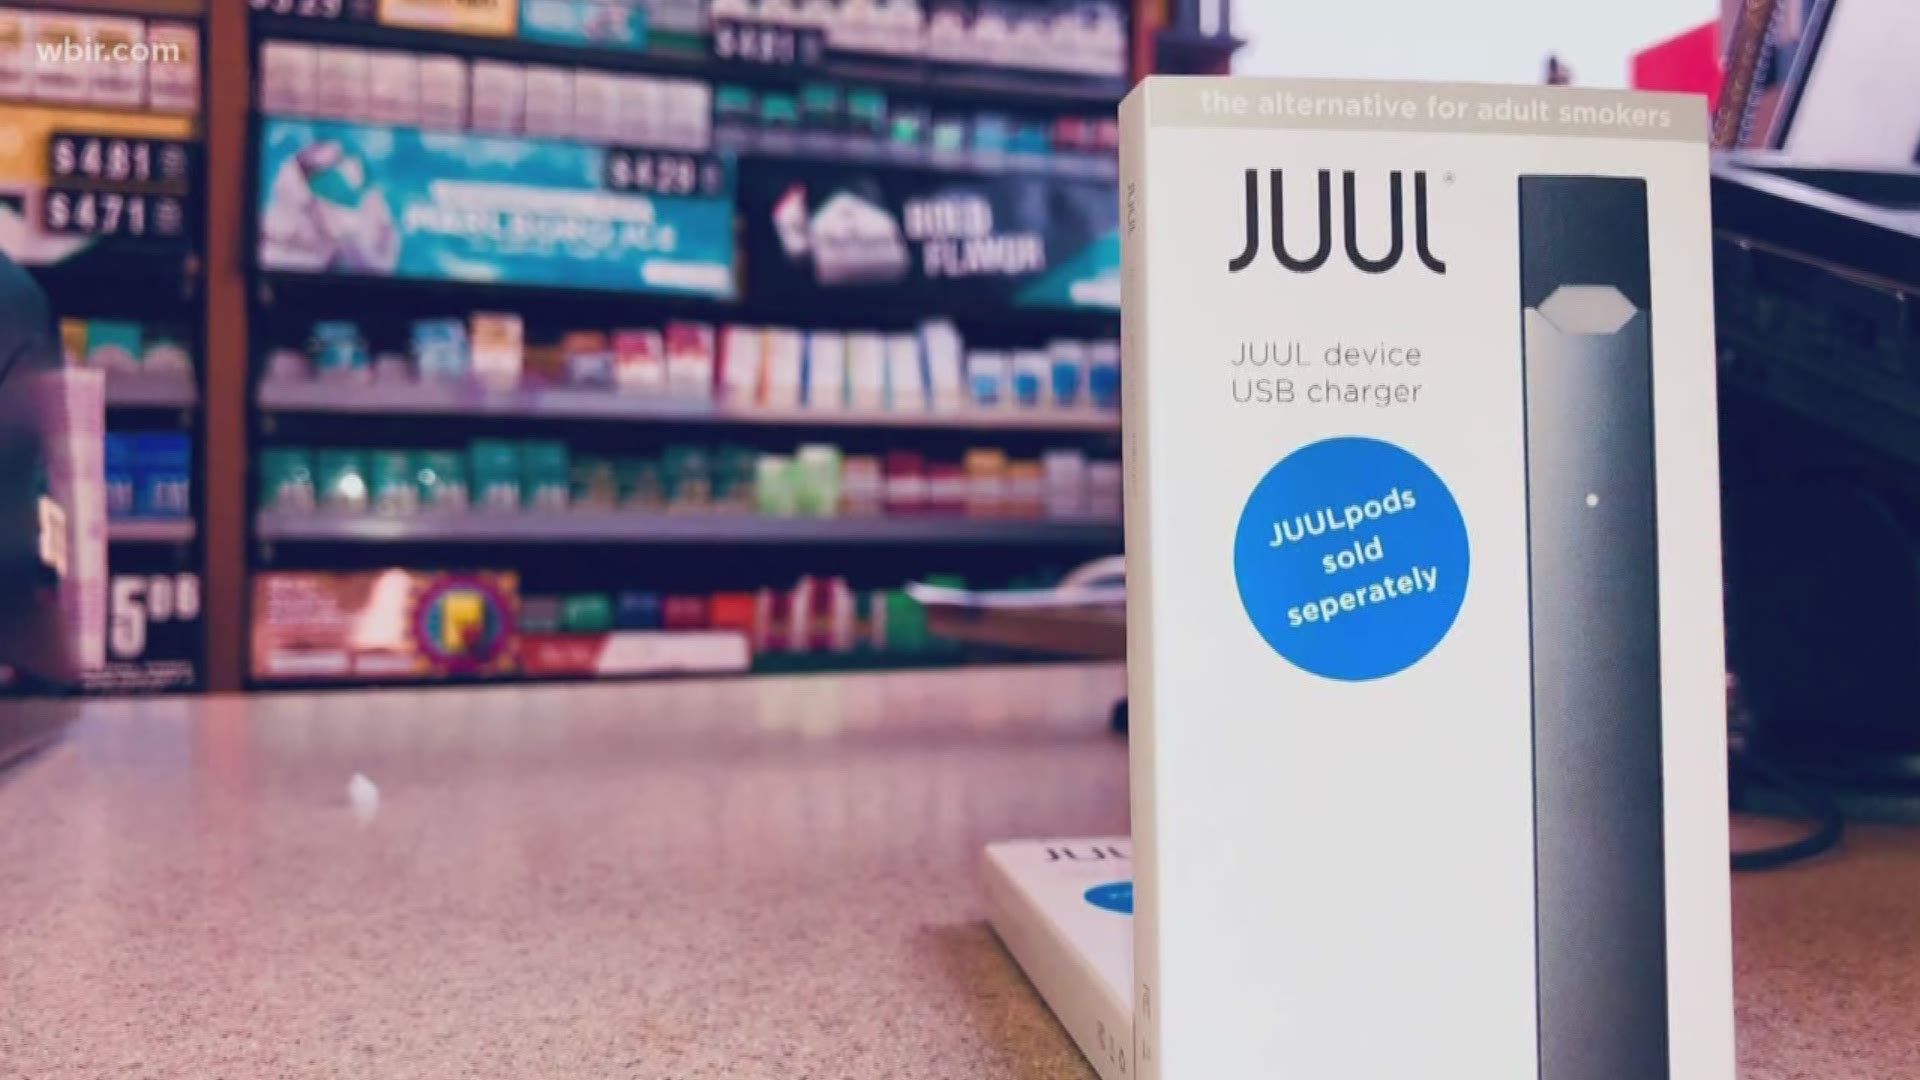 A Juul is a small e-cigarette, shaped like a flash drive and one pod contains as much nicotine as a pack of cigarettes.